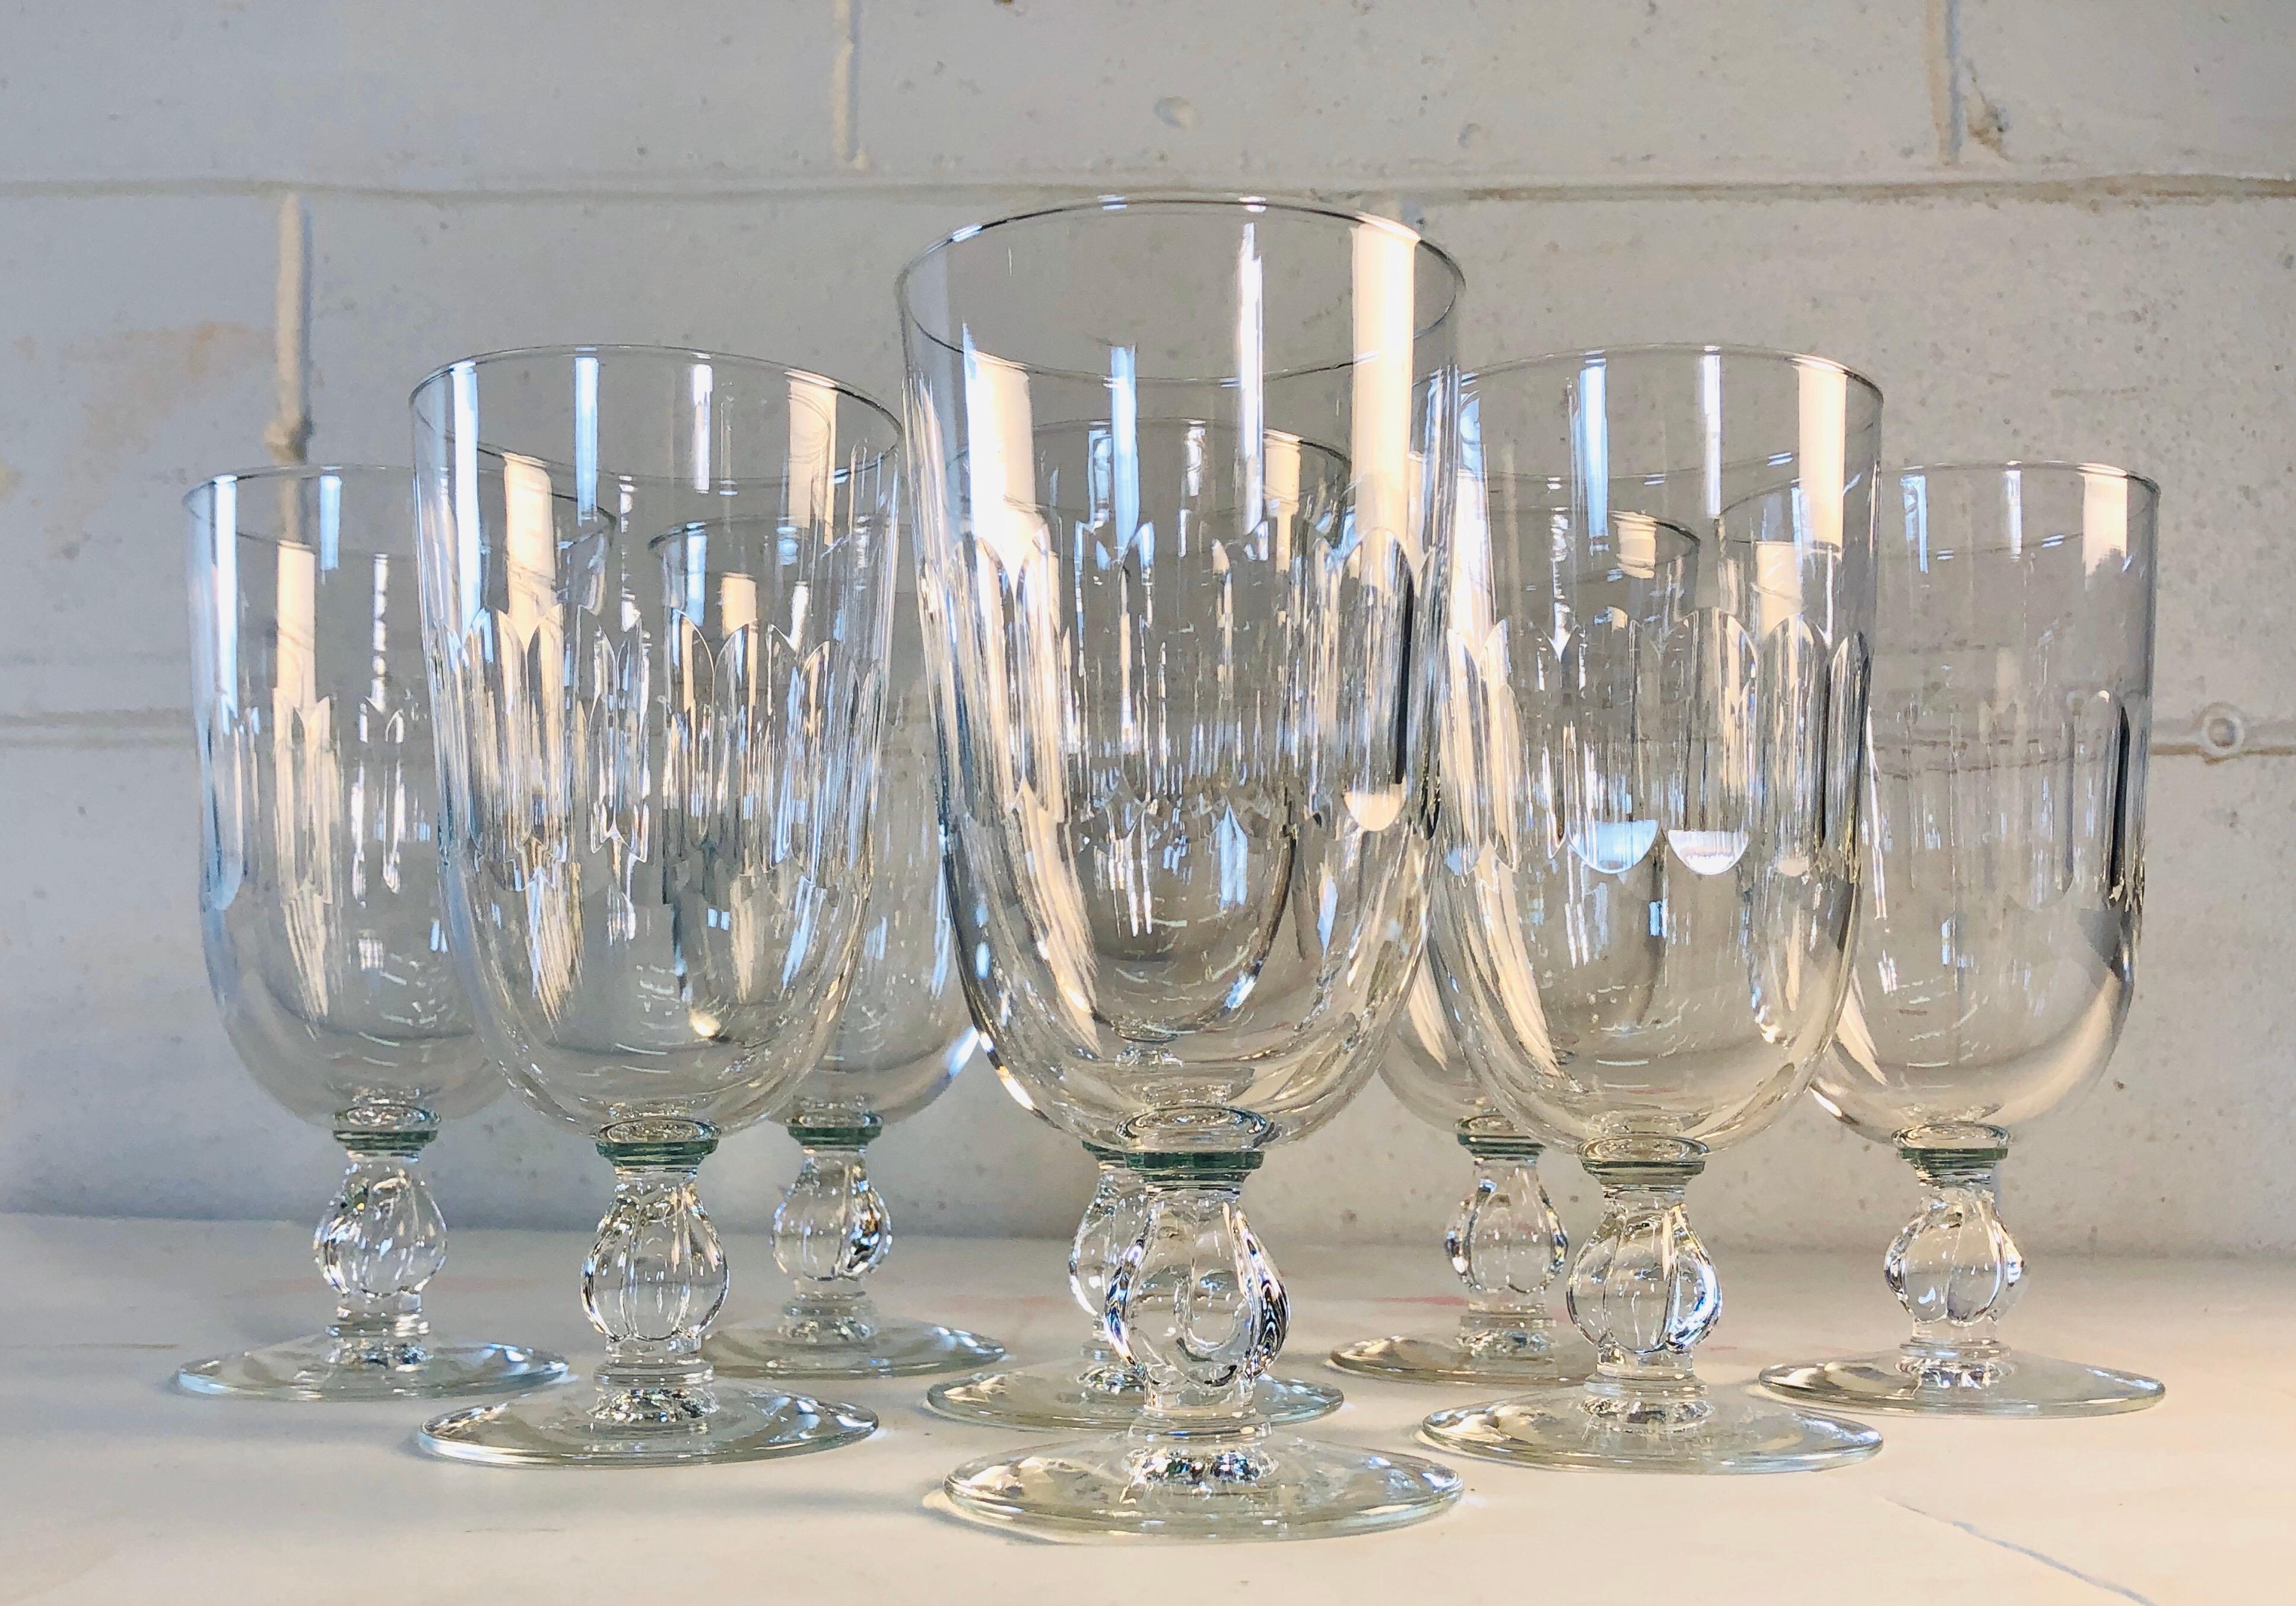 Vintage 1950s set of 8 mitred glass water stems. All handcut and polished. No marks. Excellent condition.